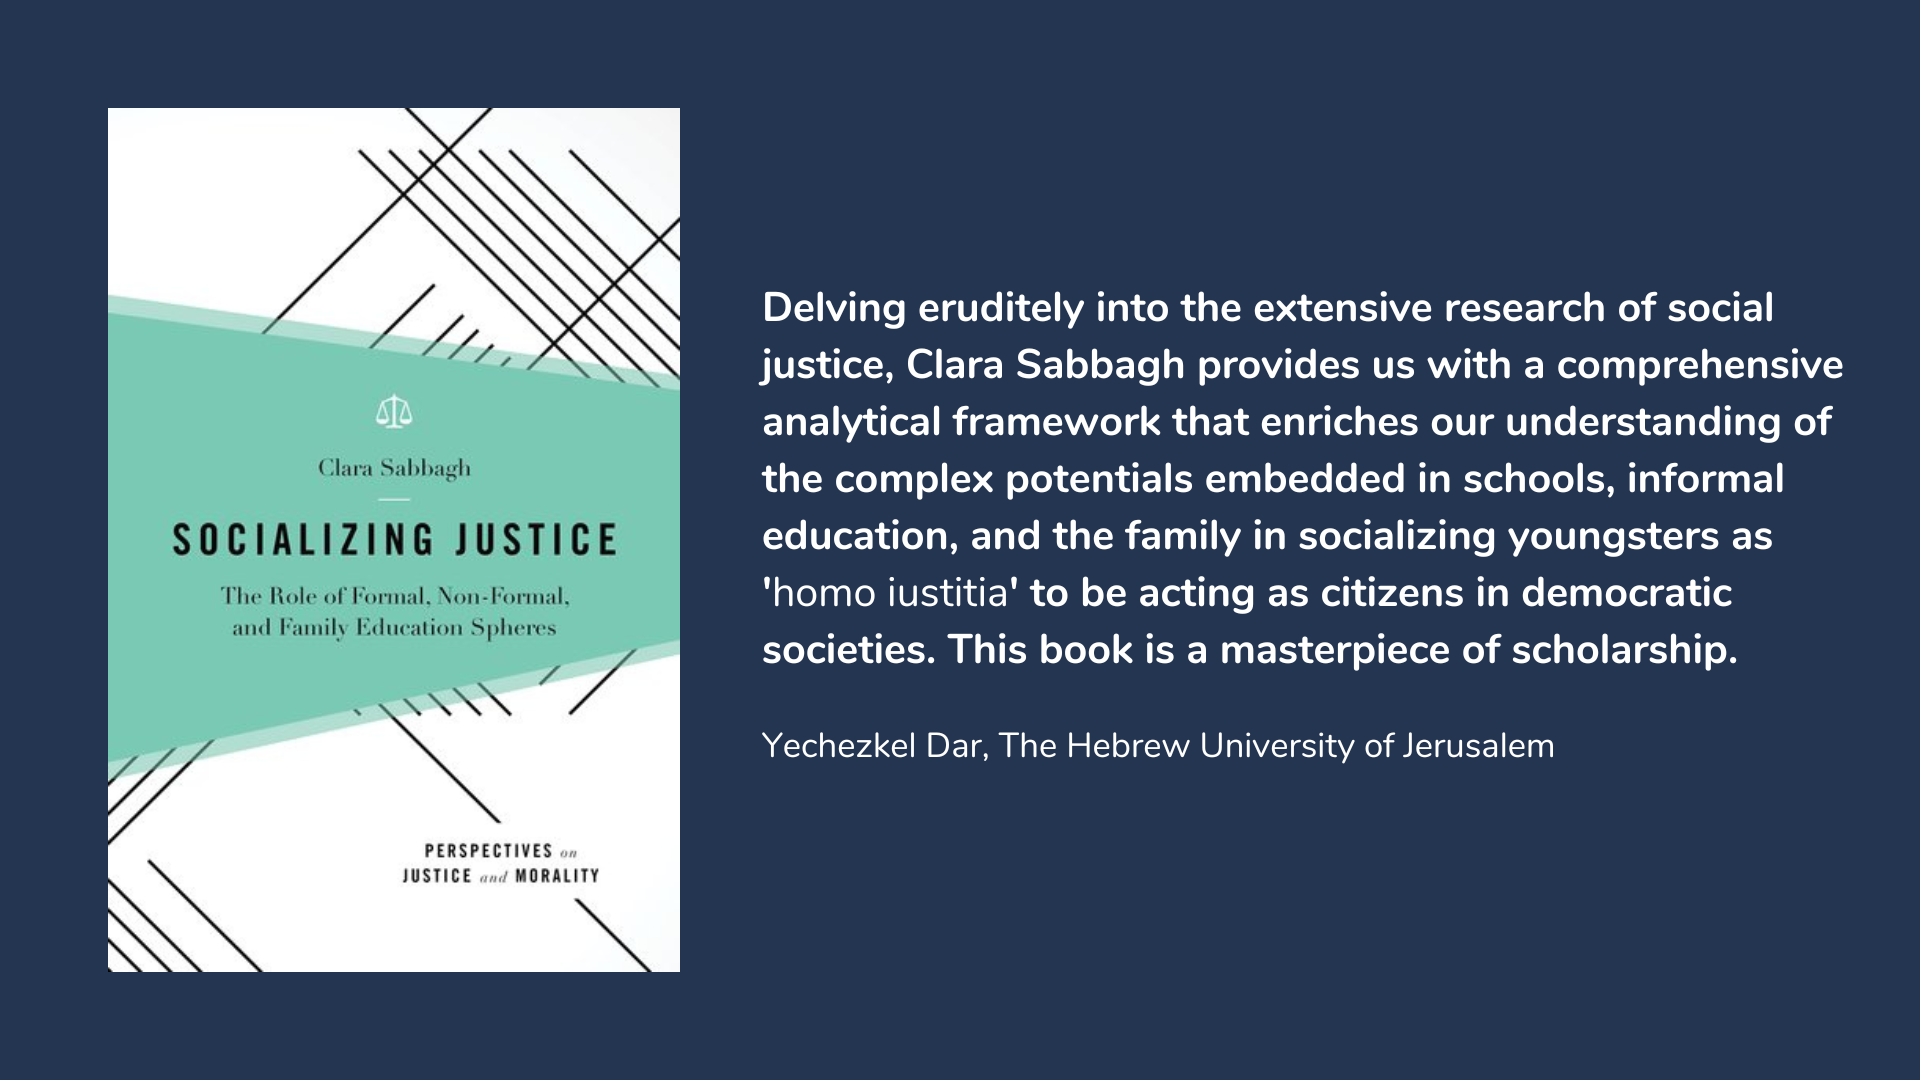 Socializing Justice: The Role of Formal, Non-Formal, and Family Education Spheres, book cover and description.